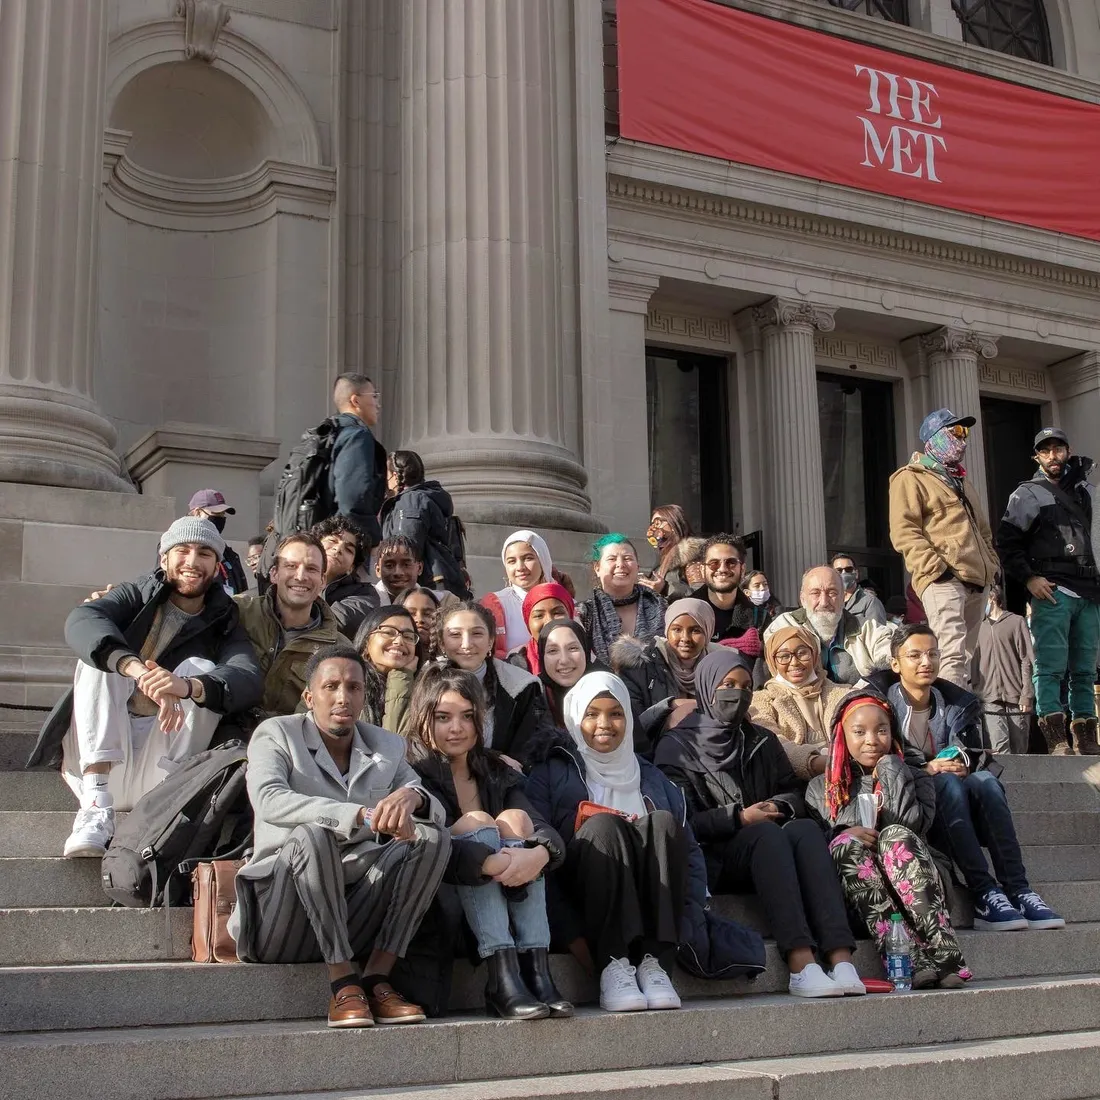 Group of students sitting on the steps outside the Metropolitan Museum of Art.